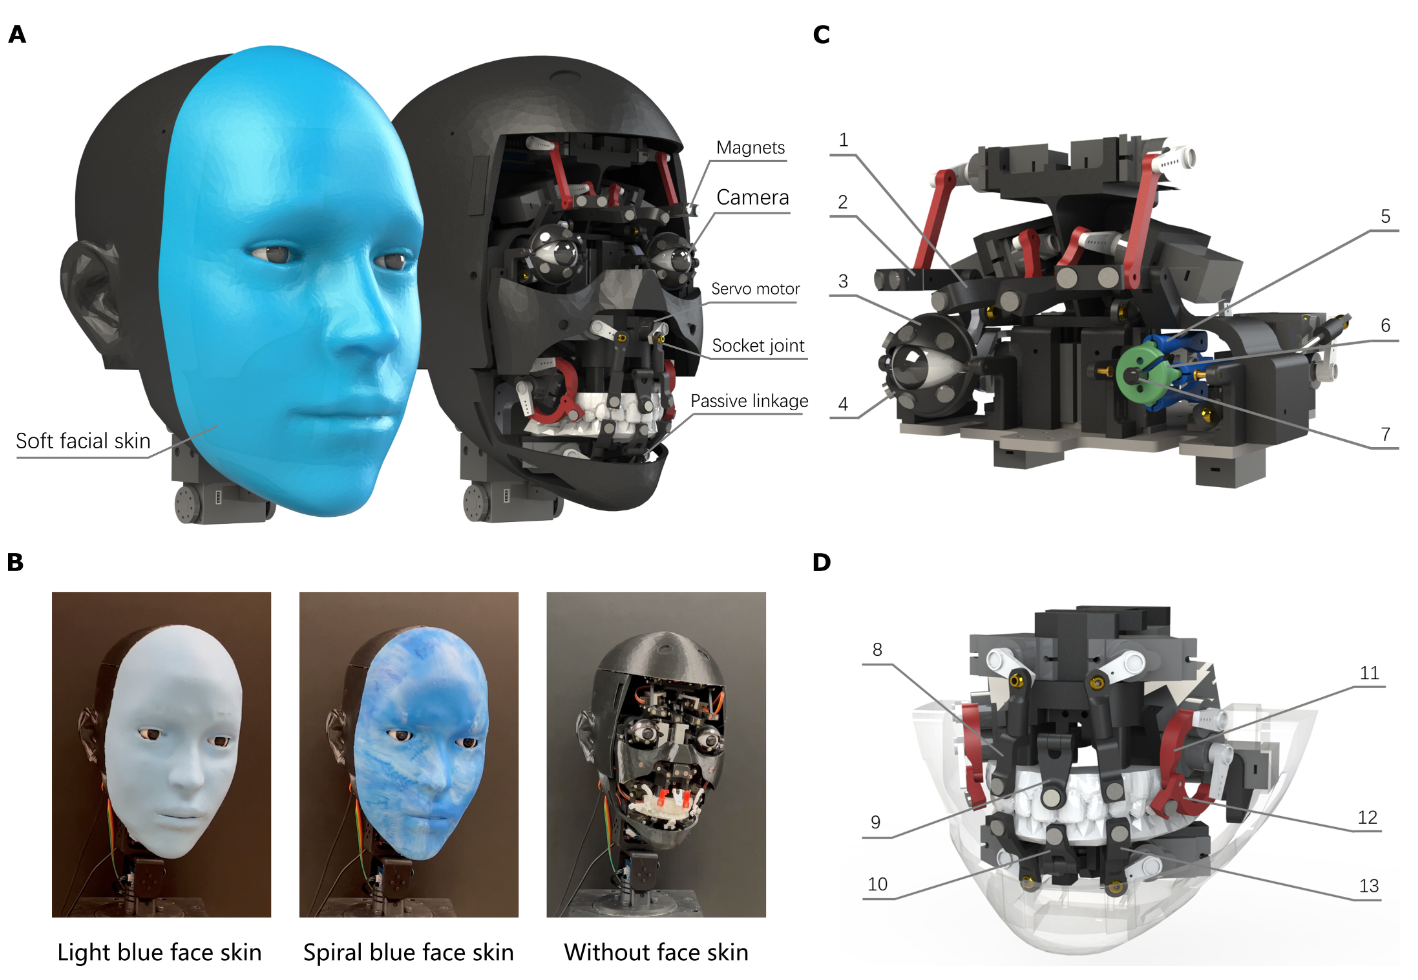 Image accompanying the article titled “Researchers Develop Horrifying Robot That Mimics Face.”